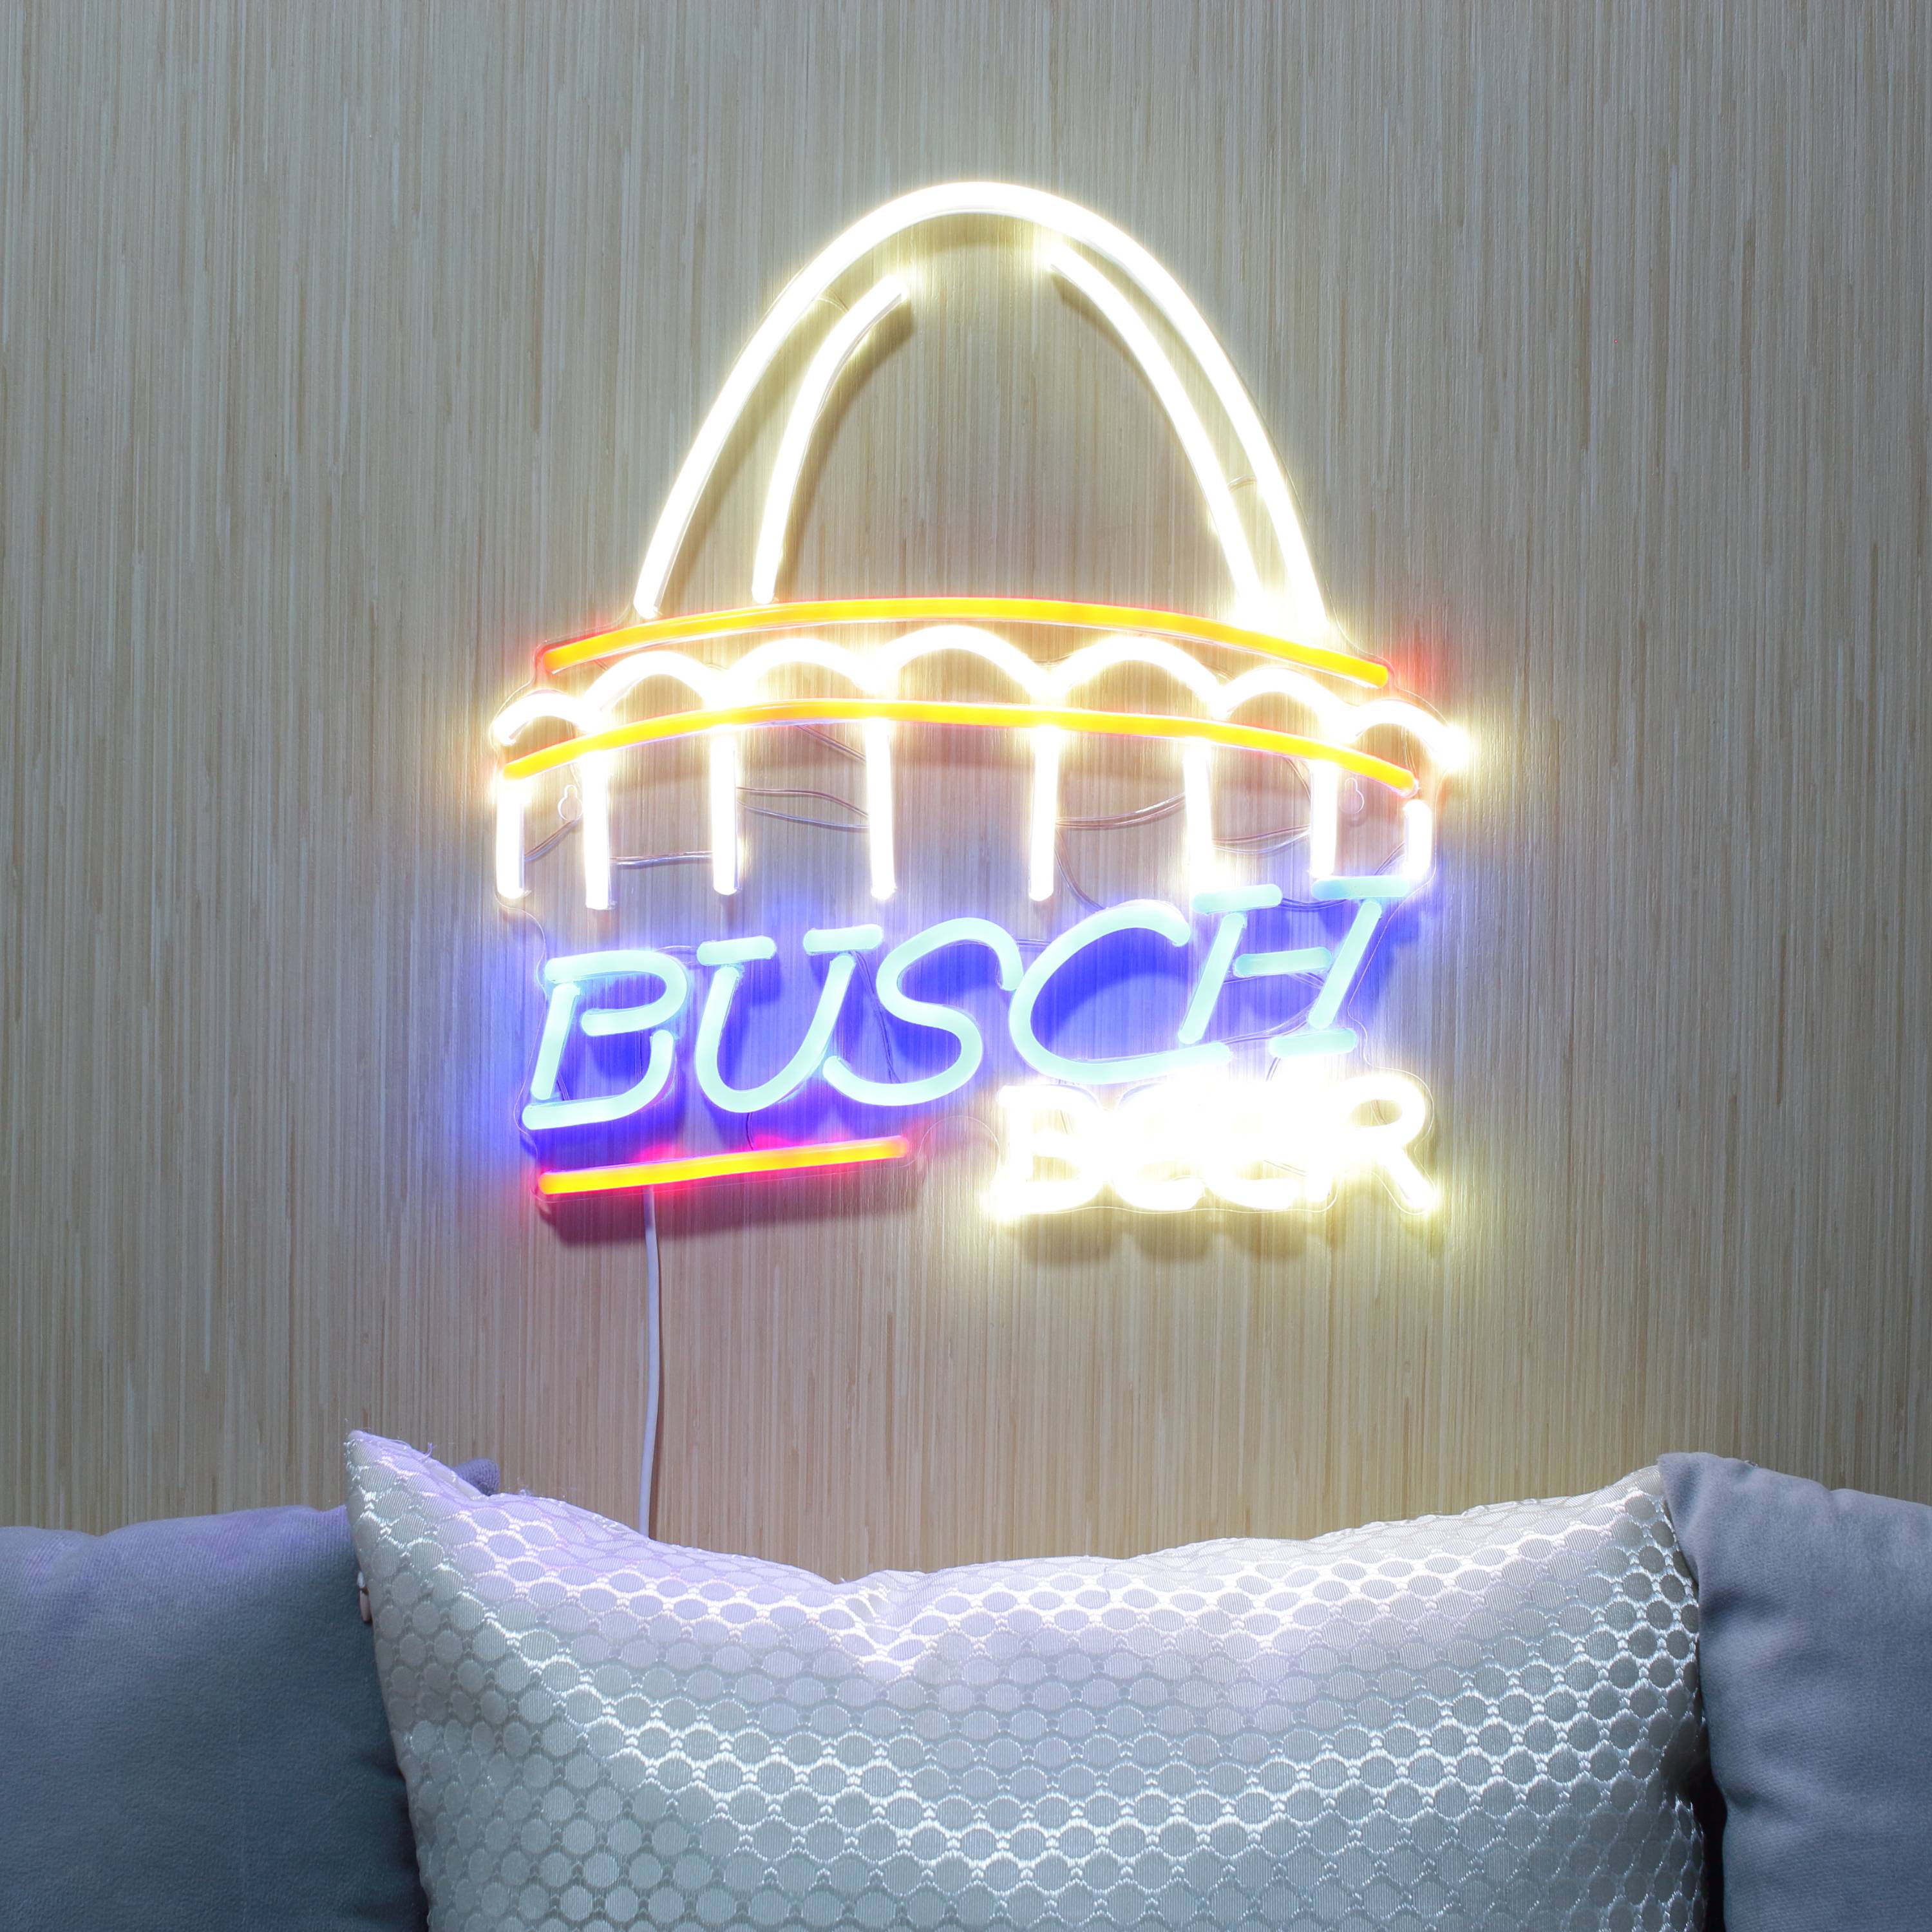 Busch Beer Circus Large Flex Neon LED Sign